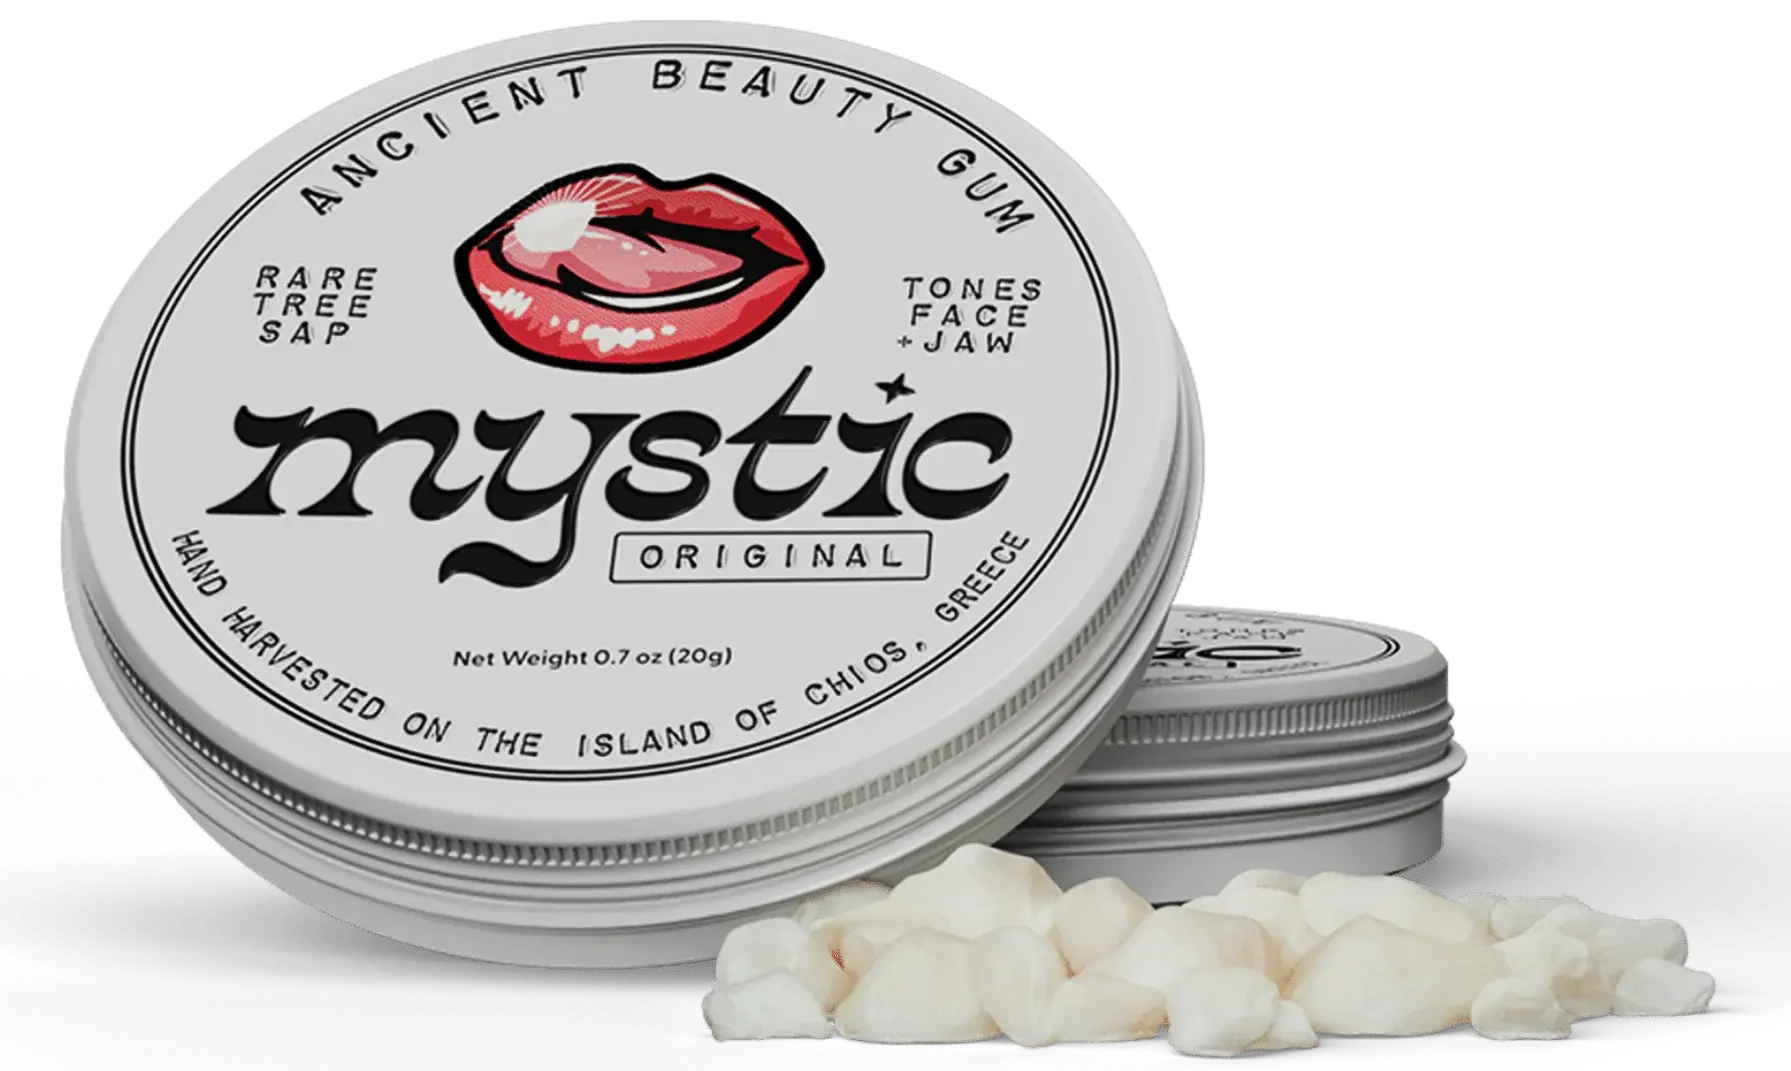 A tin of Mystic Original gum with several pieces spilled out in front.